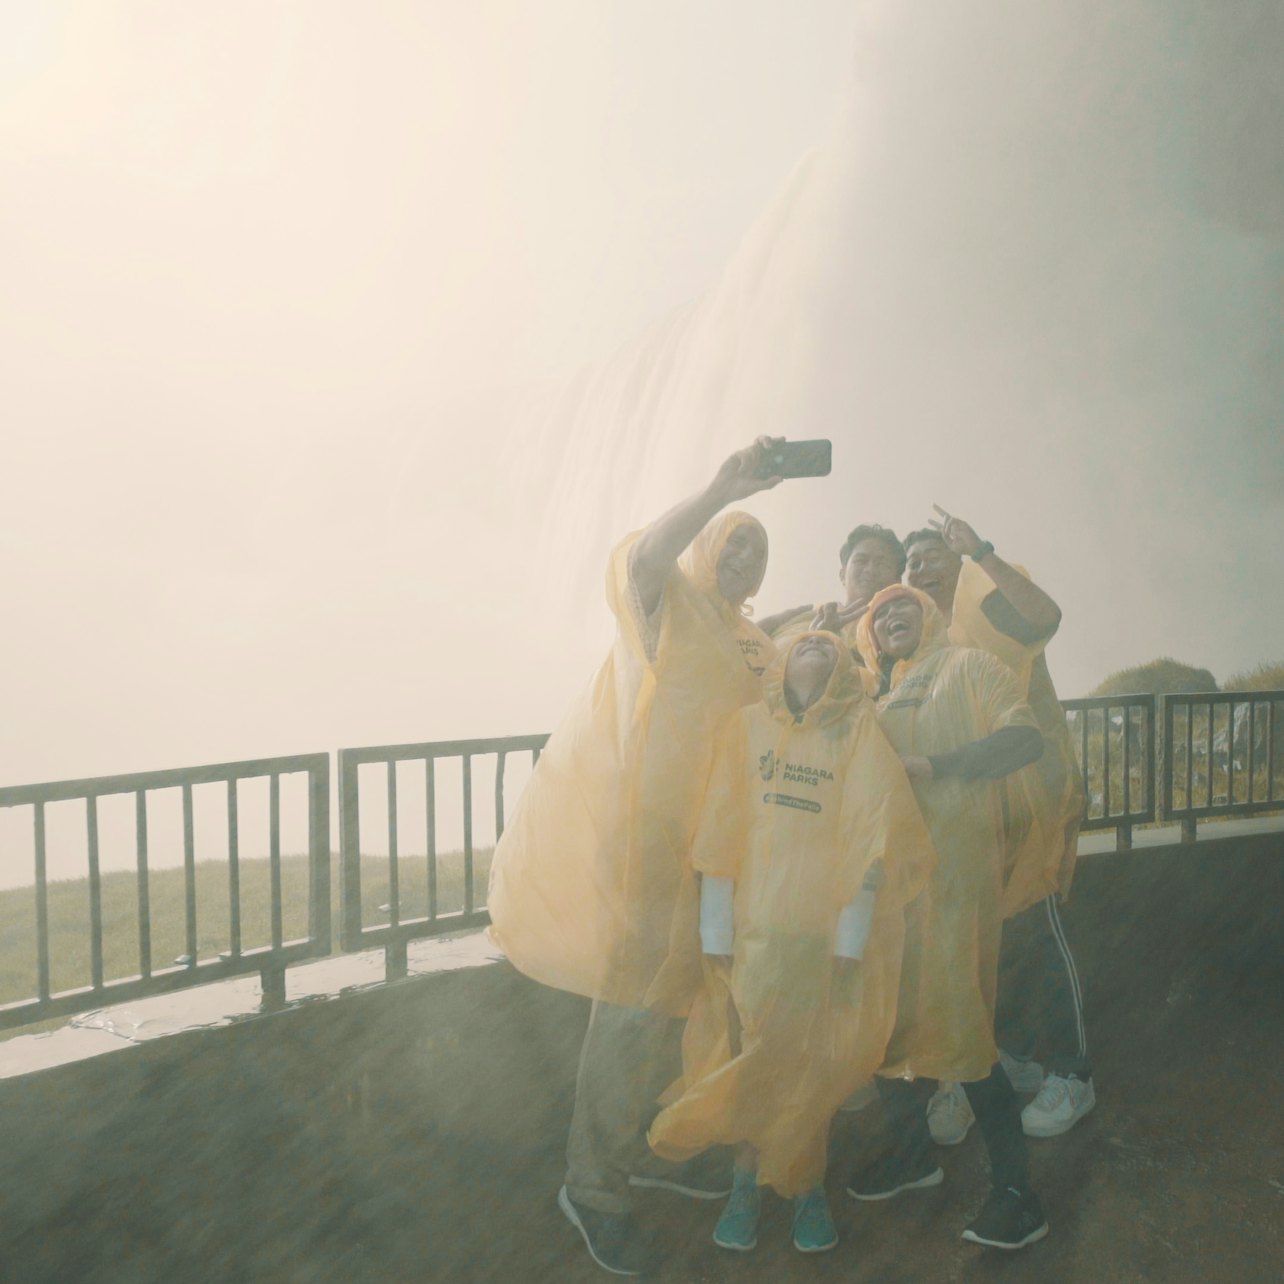 Niagara Falls Small-Group Day Tour from Toronto - Accommodations in Toronto